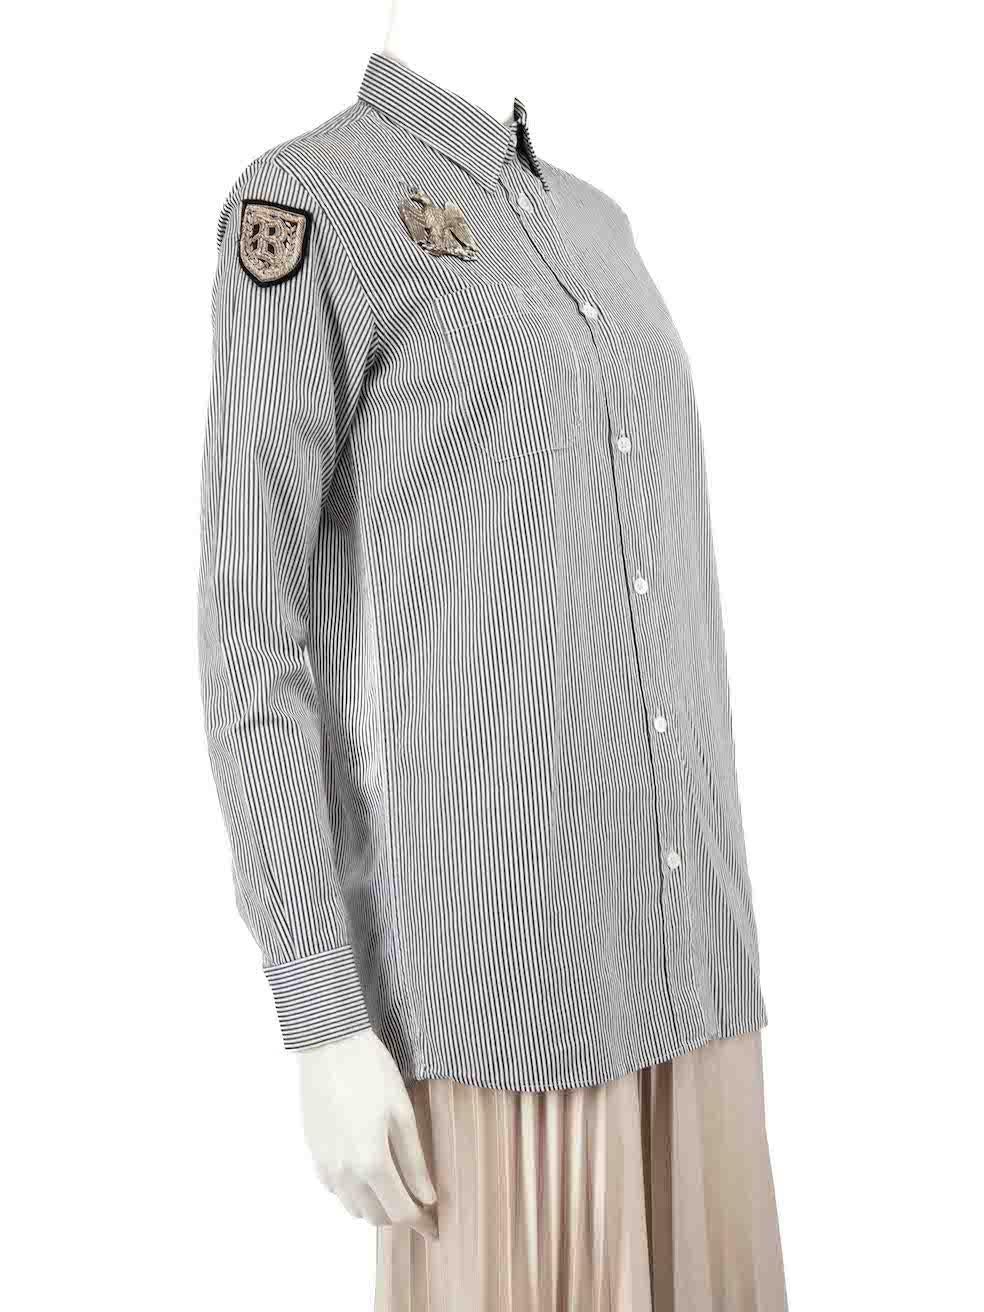 CONDITION is Very good. Minimal wear to the shirt is evident. Minimal wear to the underarm linings with light discolouration on this used Balmain designer resale item. 
 
 
 
 Details
 
 
 Grey
 
 Cotton
 
 Long sleeves shirt
 
 Striped
 
 Buttoned